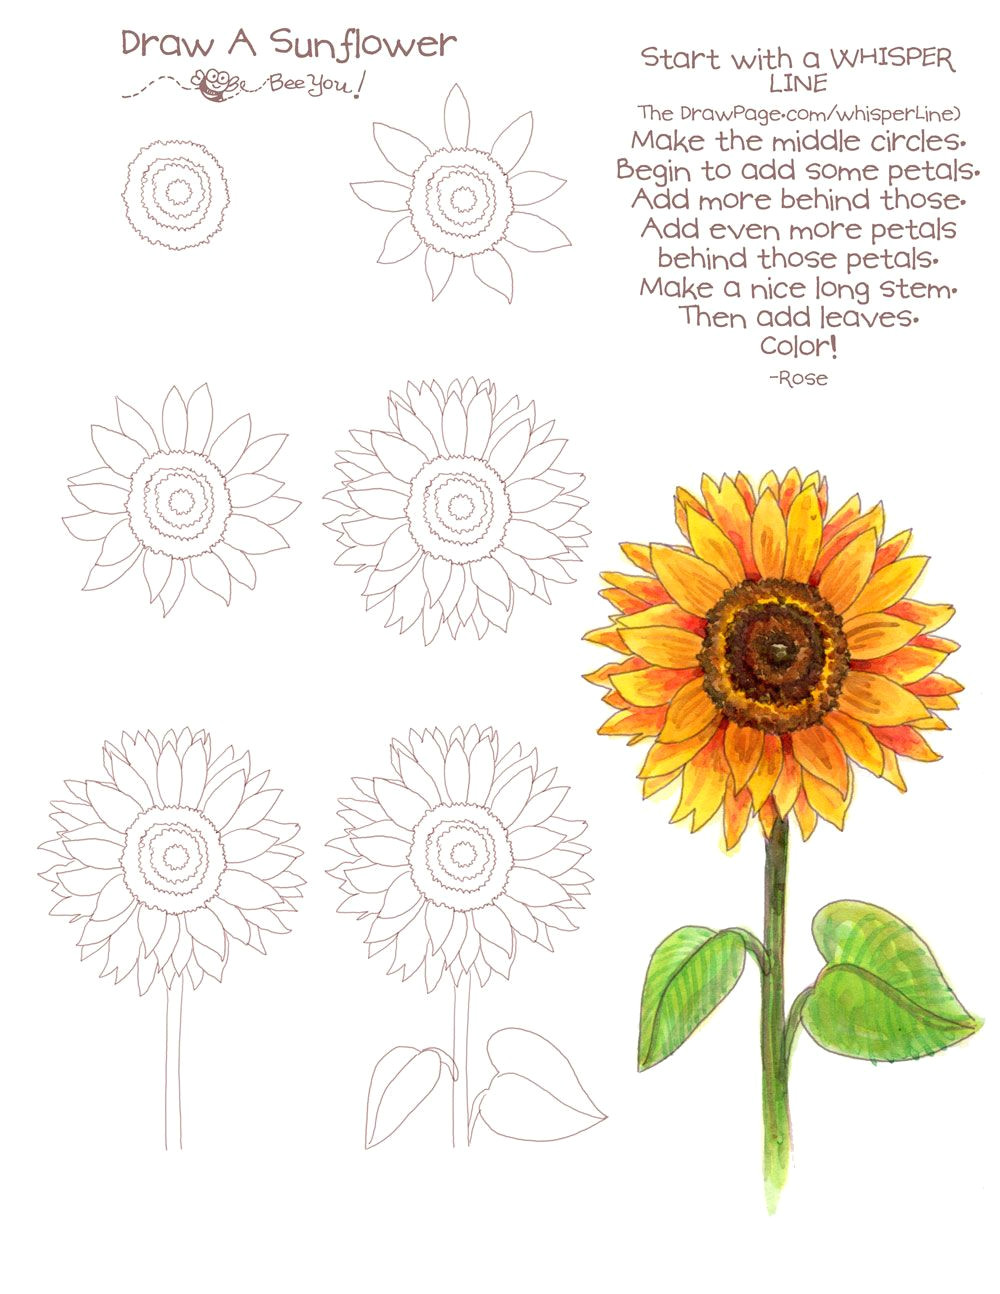 Flowers Drawing Guide Drawing A Sunflower Draw Pages From thedrawpage Com Pinterest